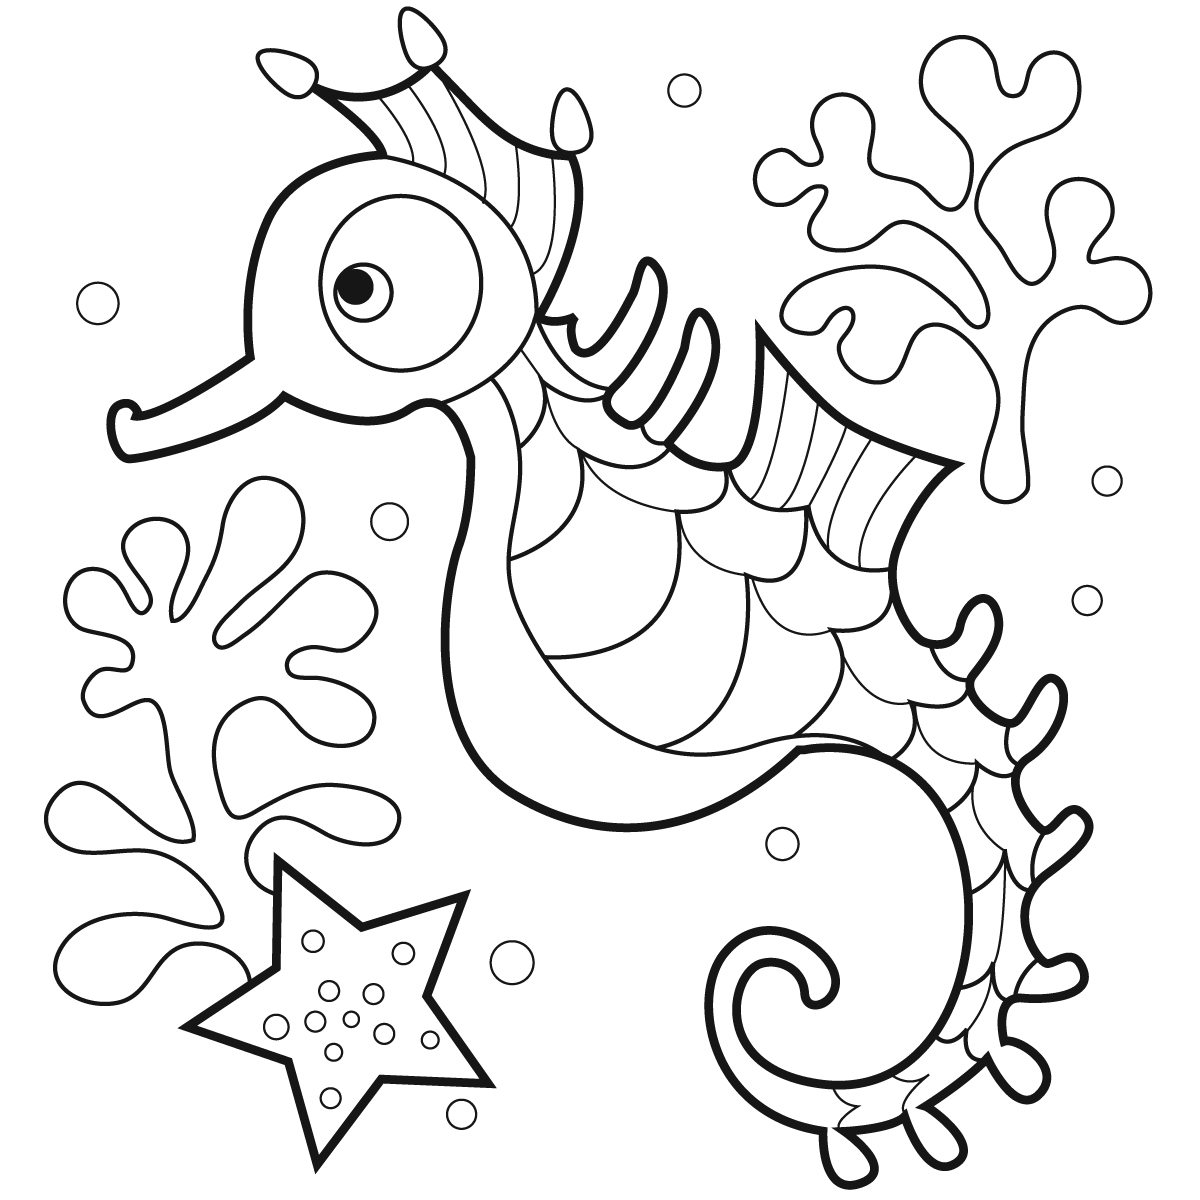 Kids Seahorse Coloring Pages | Animal Coloring pages of ...